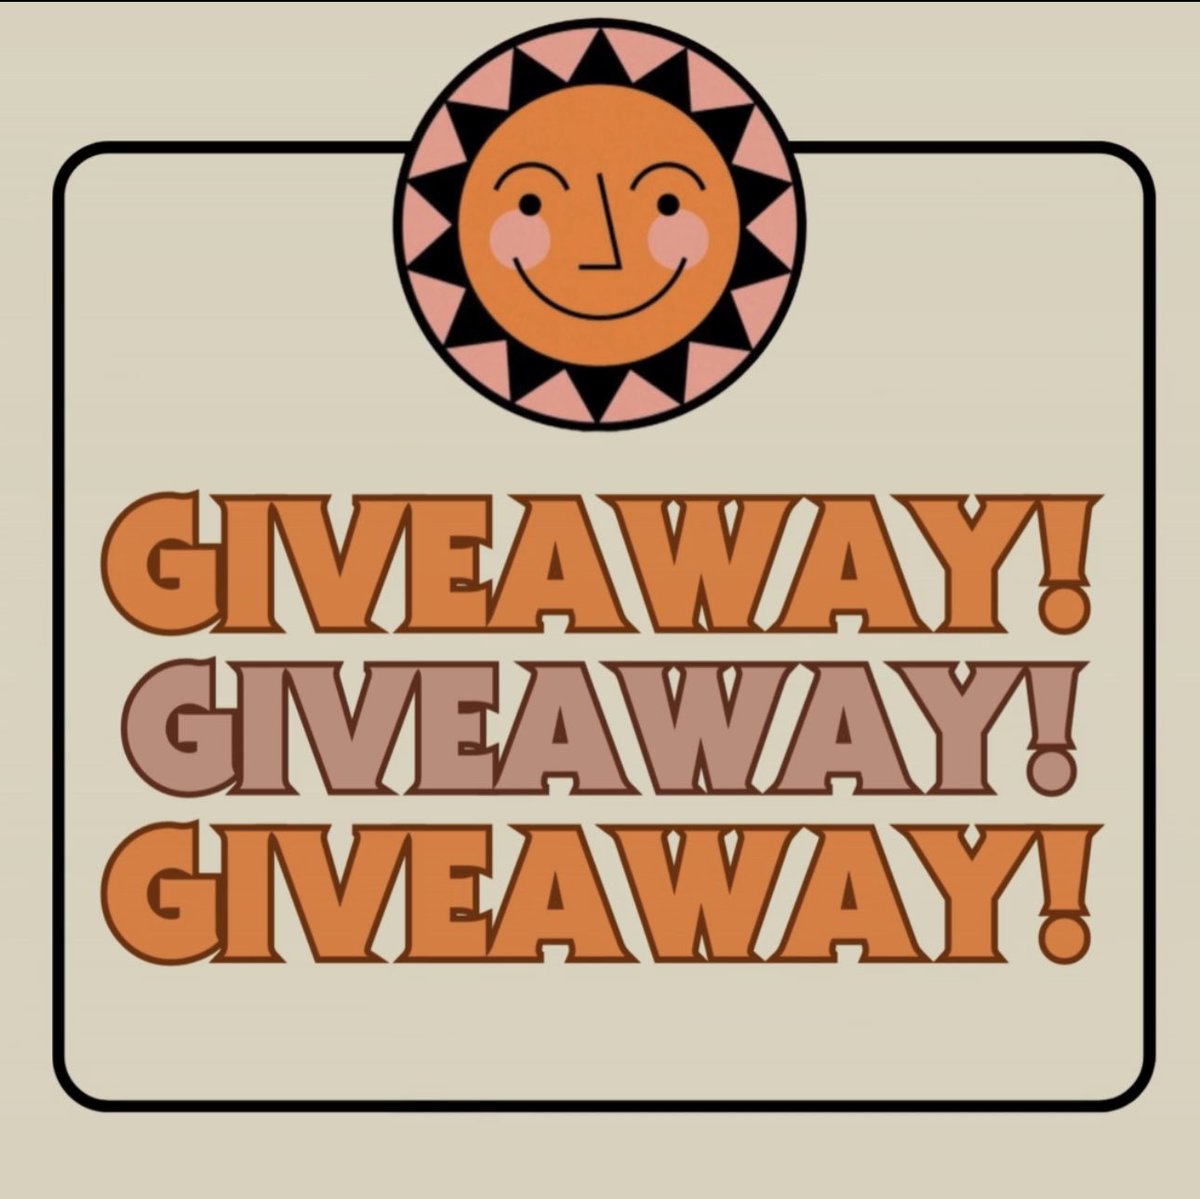 ☀️🧡 GIVEAWAY TIME! 🧡☀️ 1 lucky winner gets a ONCE tshirt & swag, plus a pair of tix to see @speedyortiz at @ArtsattheArmory on 9/8! 🧡 Enter by RSVPing for ONCE x @BoyntonYardsMa Block Party on 7/29! Contest ends 7/23 ☀️ good luck! rock on! shorturl.at/hmCY4